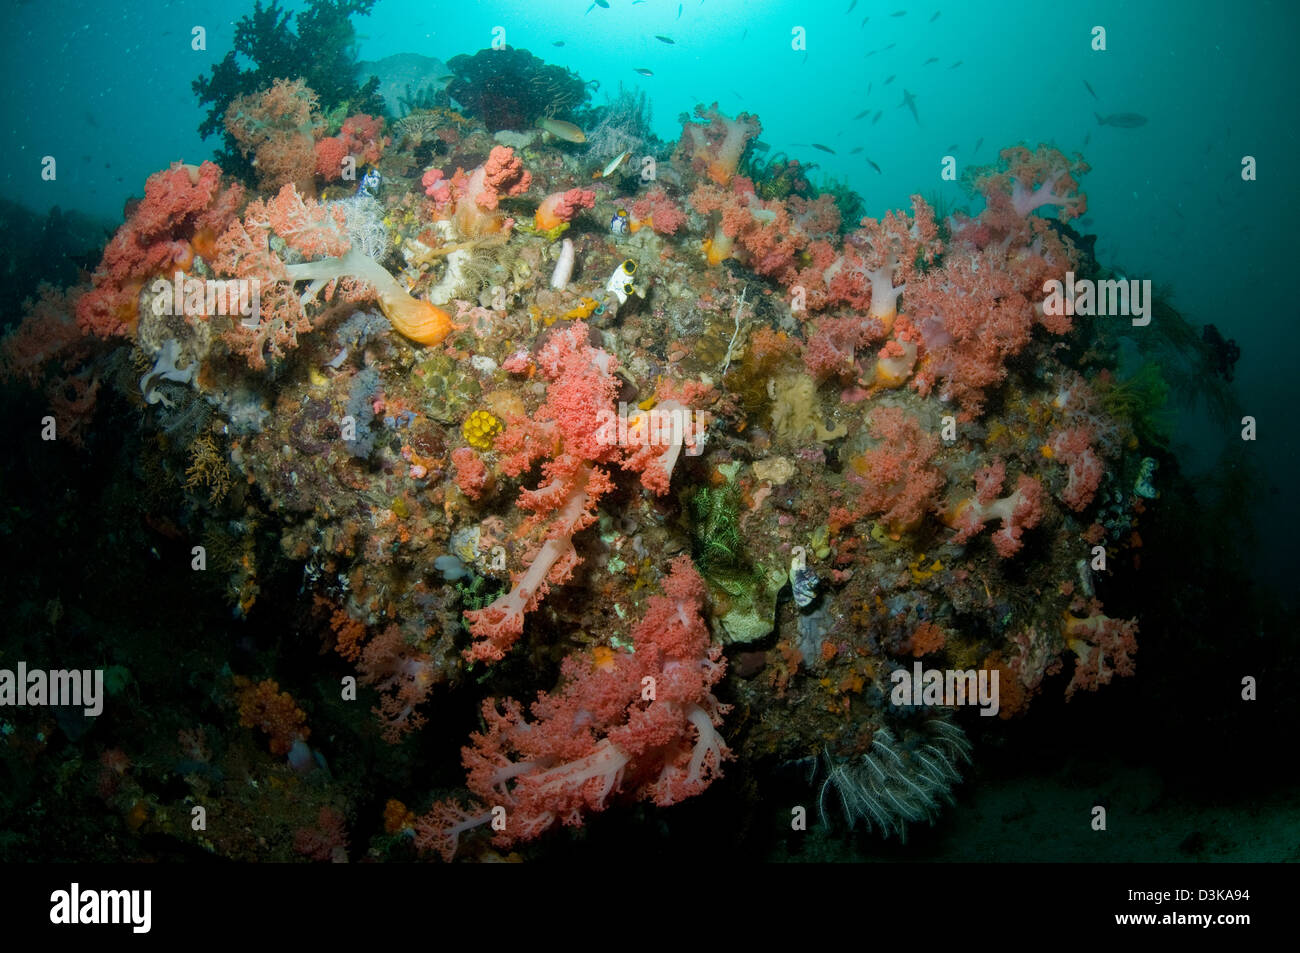 Colorful reef scene with massive pink and white soft coral, yellow crinoid, green coral, Komodo, Indonesia. Stock Photo